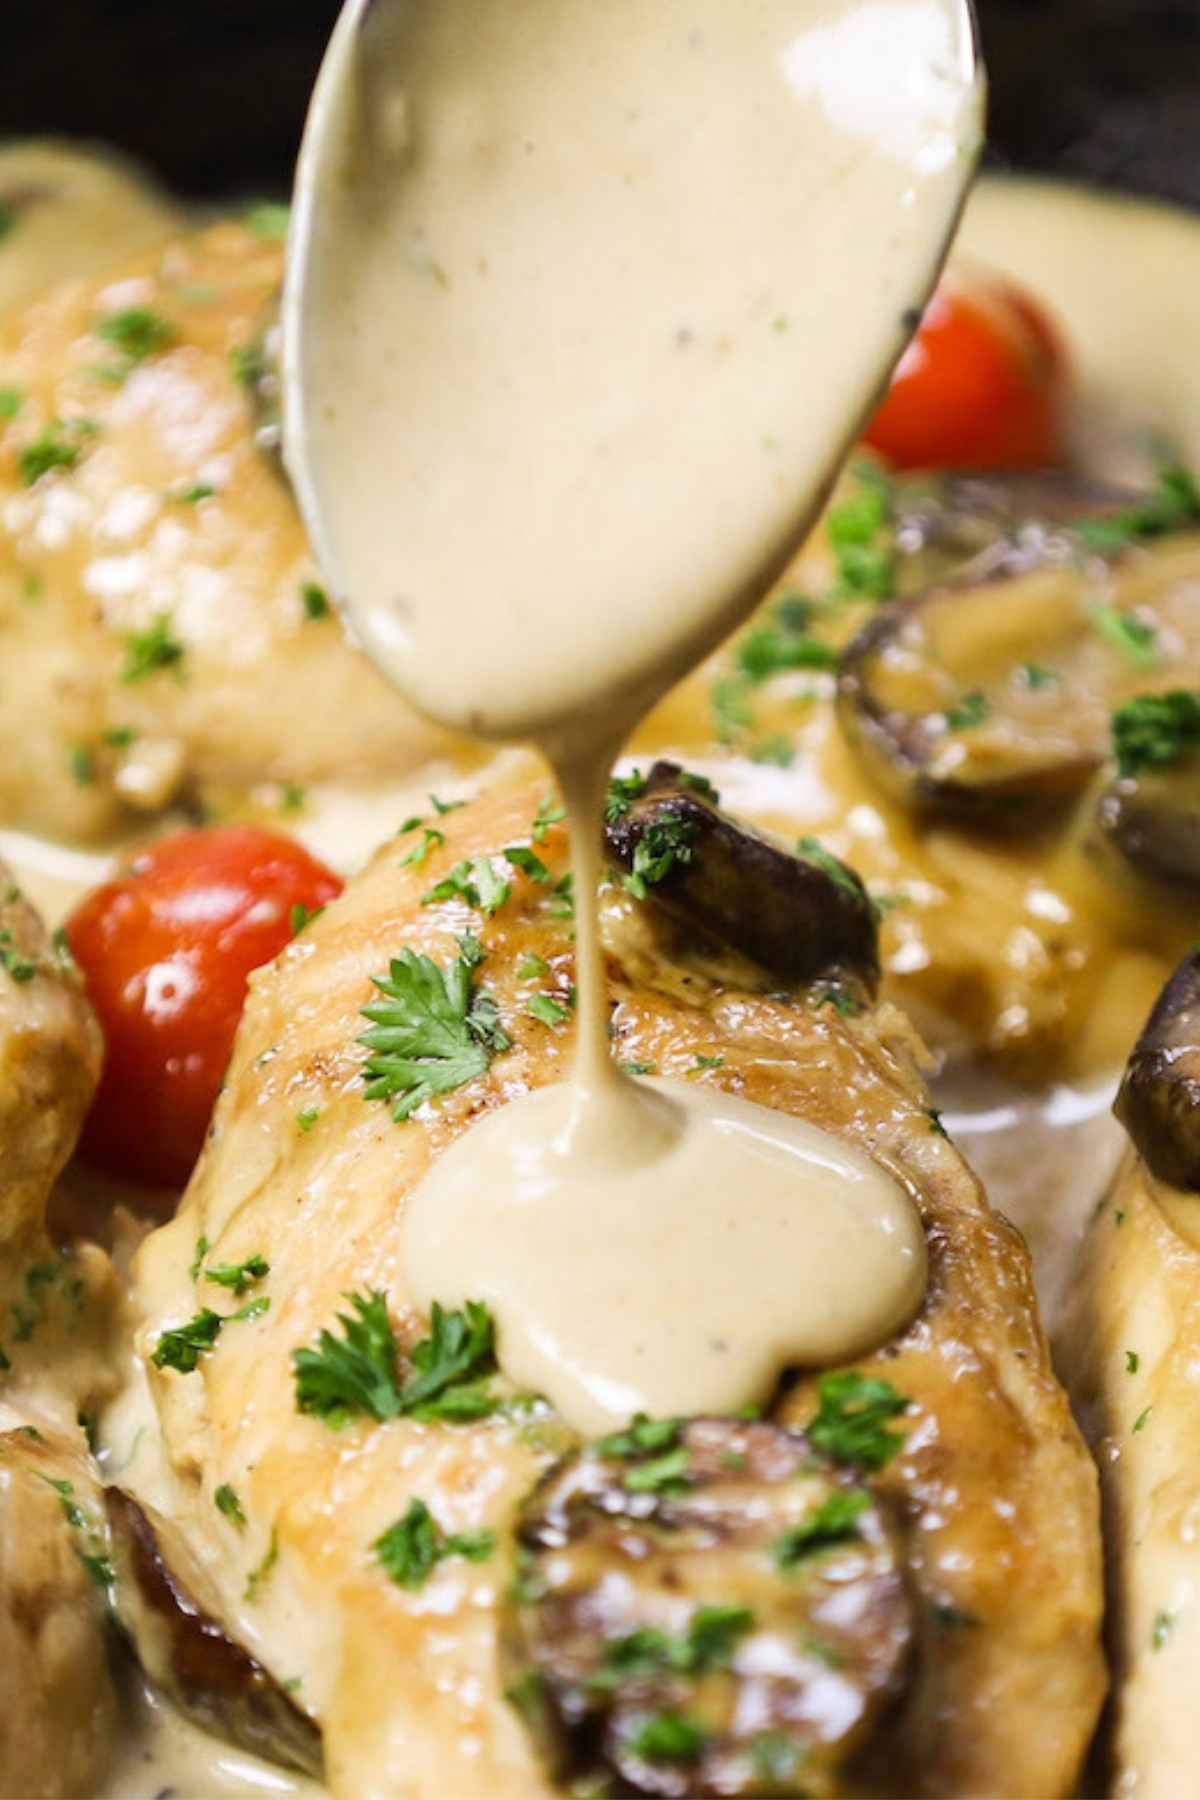 Cream of Mushroom Chicken is an easy weeknight meal with juicy chicken breasts in a creamy mushroom sauce! It’s ready to enjoy in just 35 minutes and everything is made from scratch.